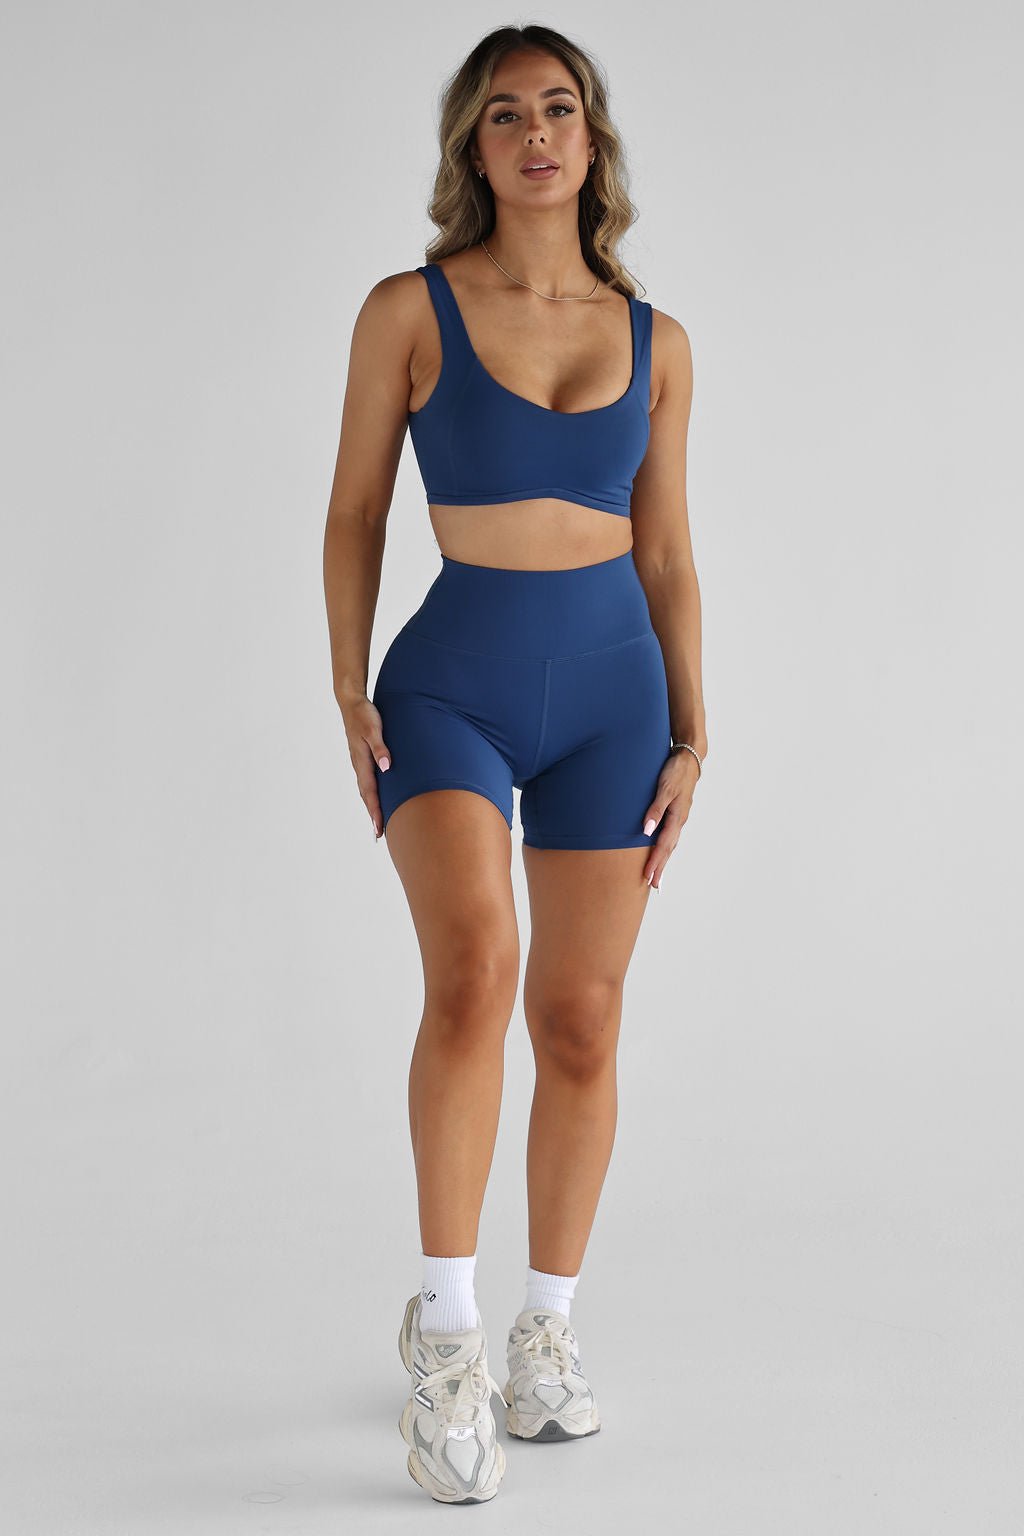 Luxe Signature Crop - Royal Blue - LEELO ACTIVE